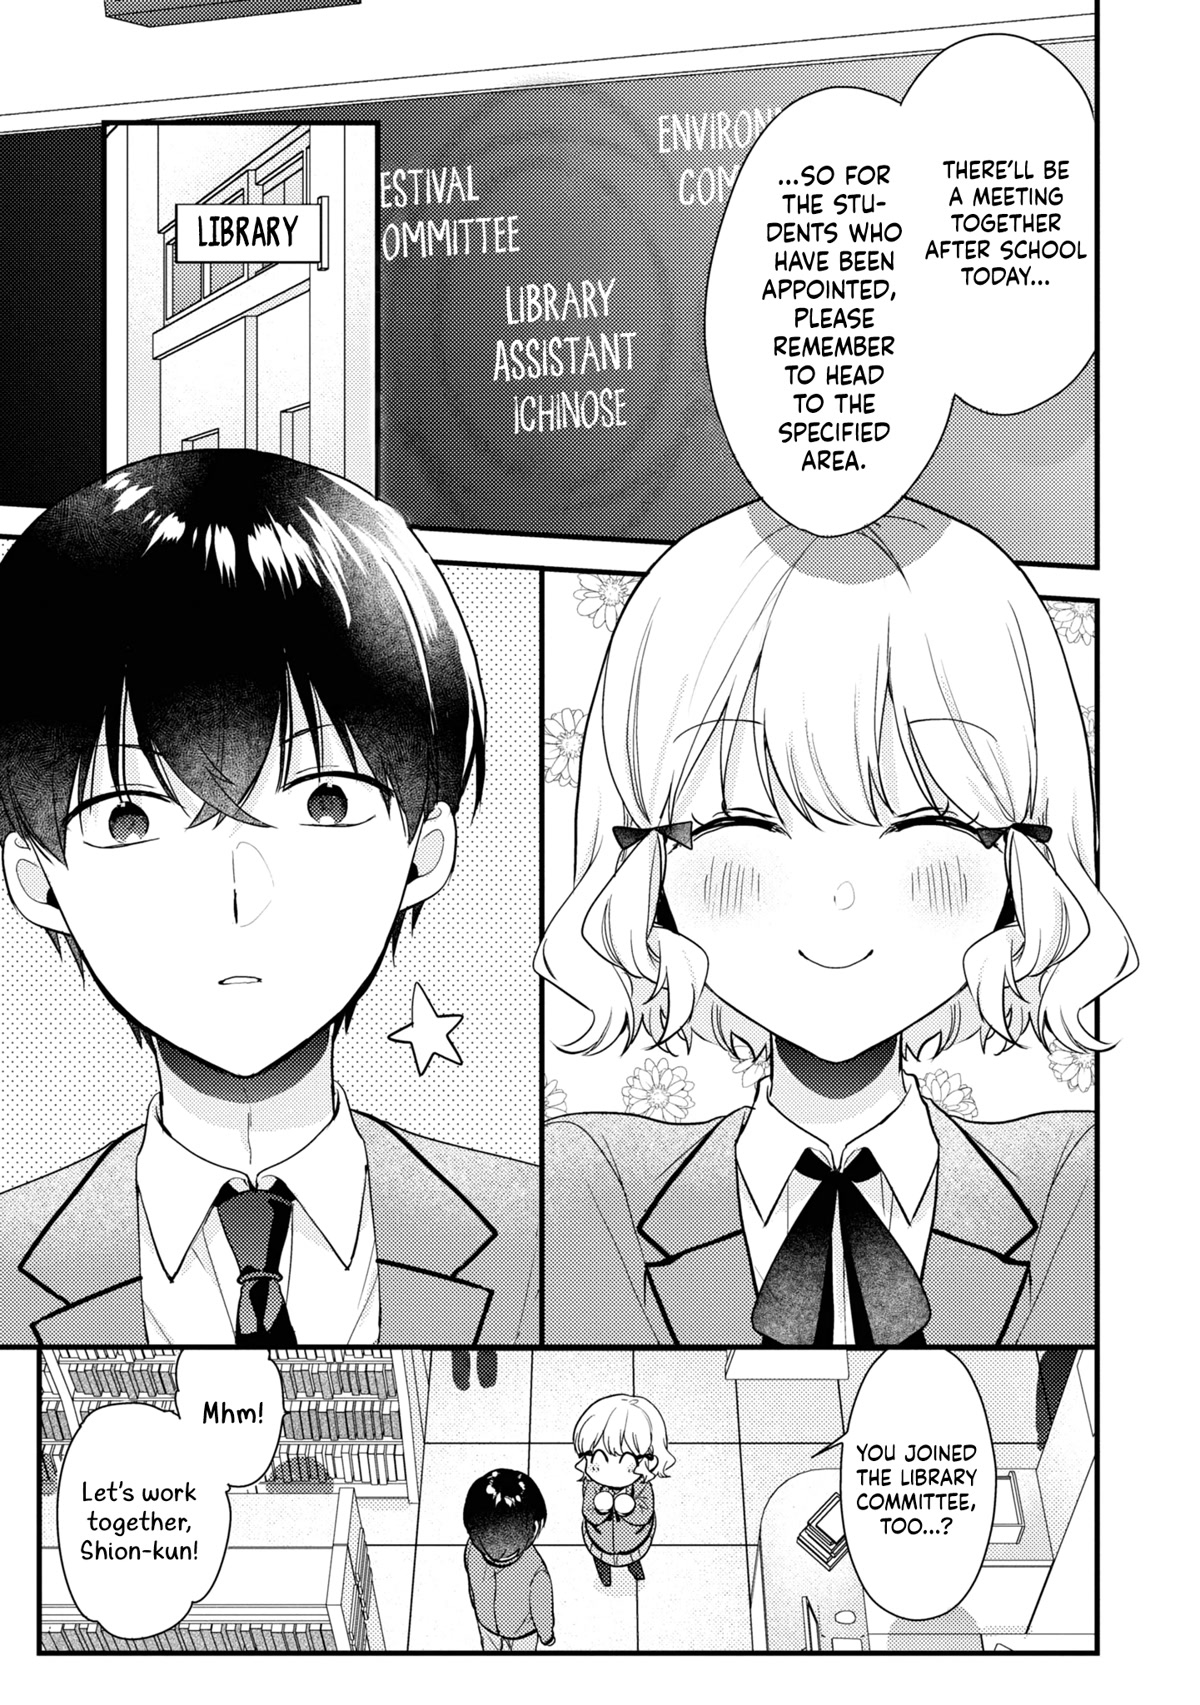 I Have A Second Chance At Life, So I’Ll Pamper My Yandere Boyfriend For A Happy Ending!! Chapter 3 #15